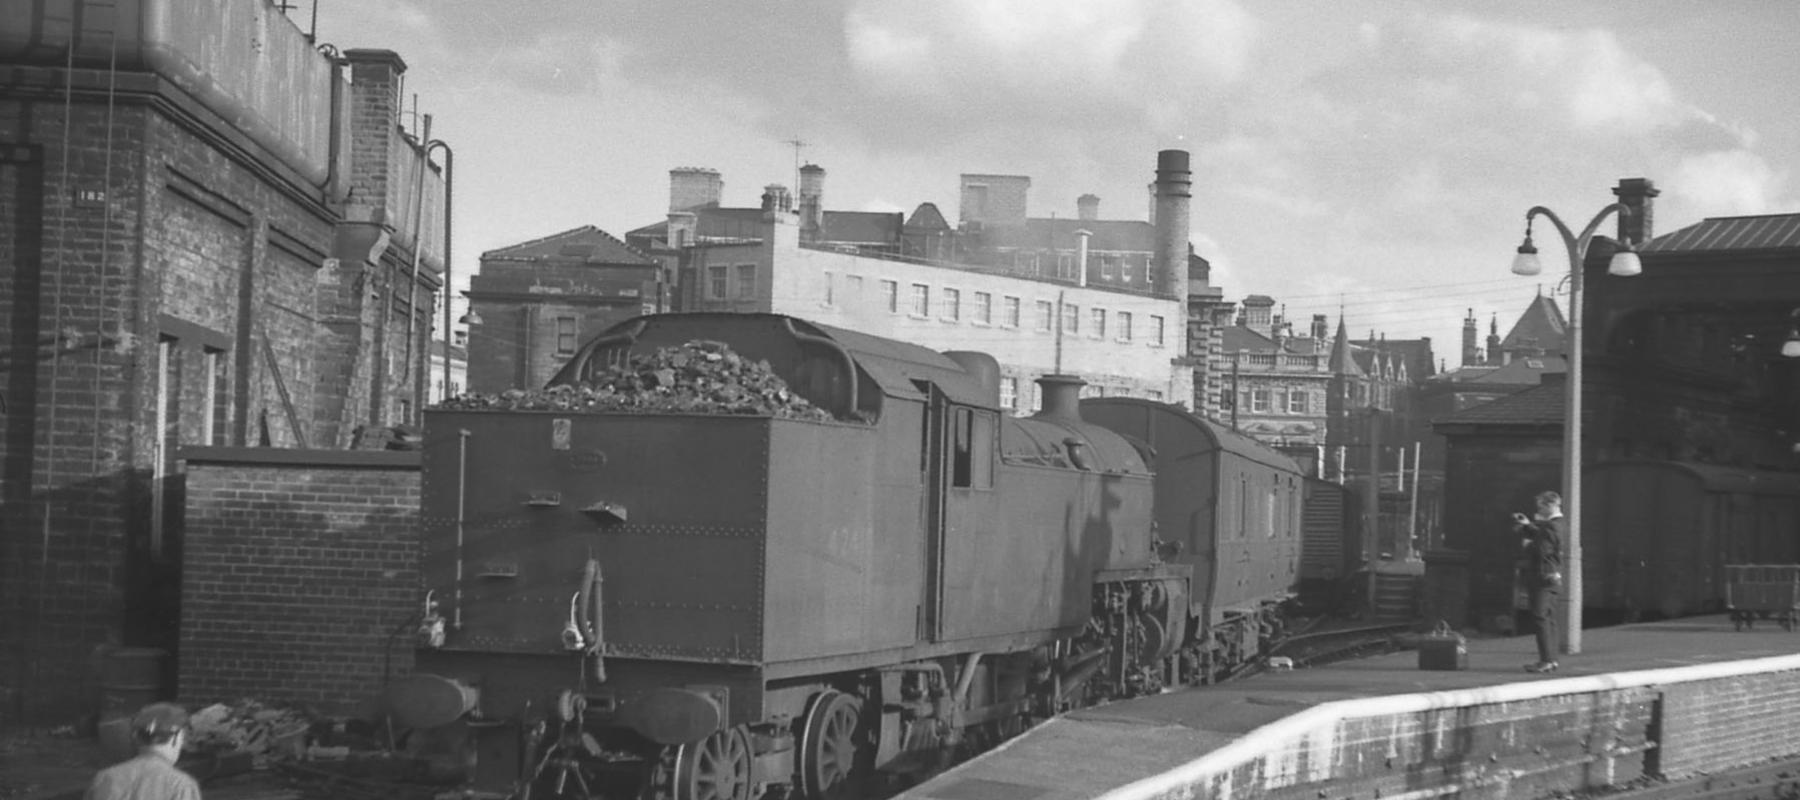 Locomotive in the sidings at Huddersfield Station